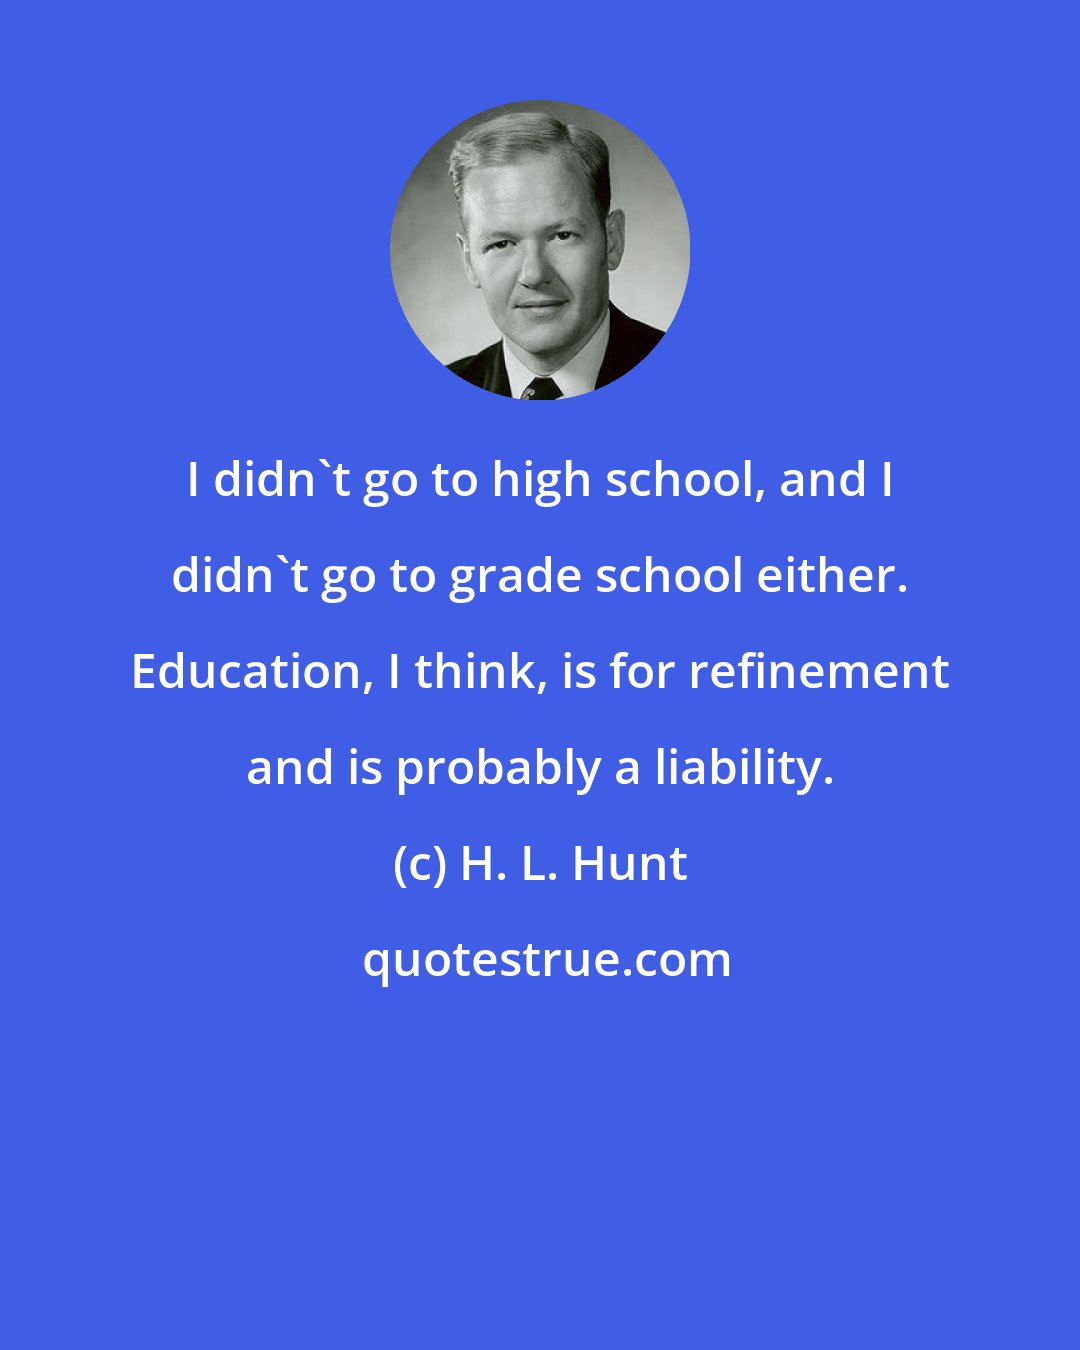 H. L. Hunt: I didn't go to high school, and I didn't go to grade school either. Education, I think, is for refinement and is probably a liability.